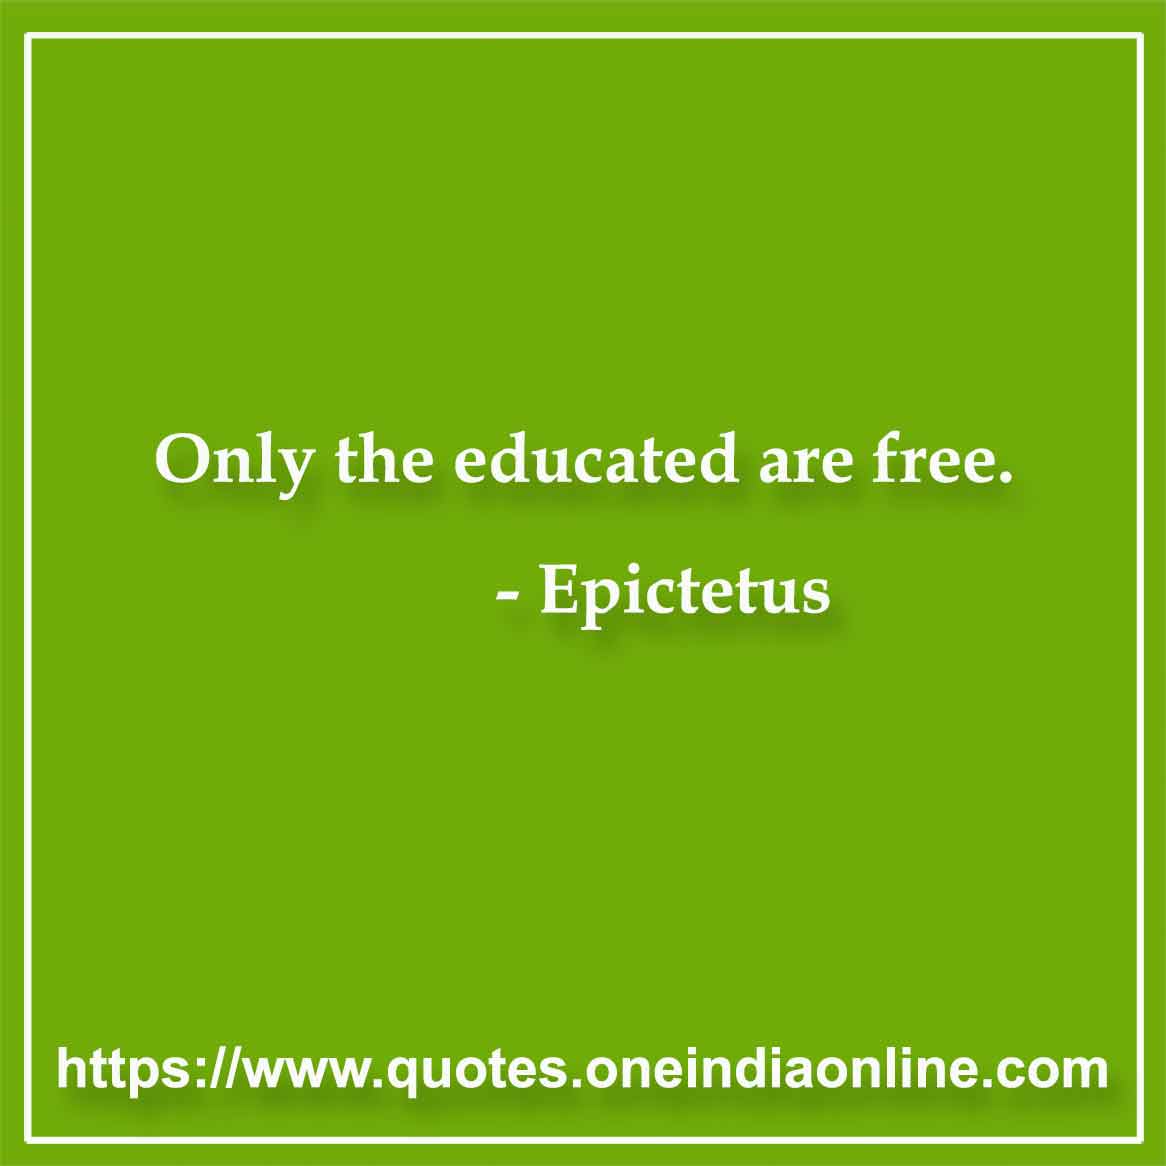 Only the educated are free.

- Freedom quotes by Epictetus